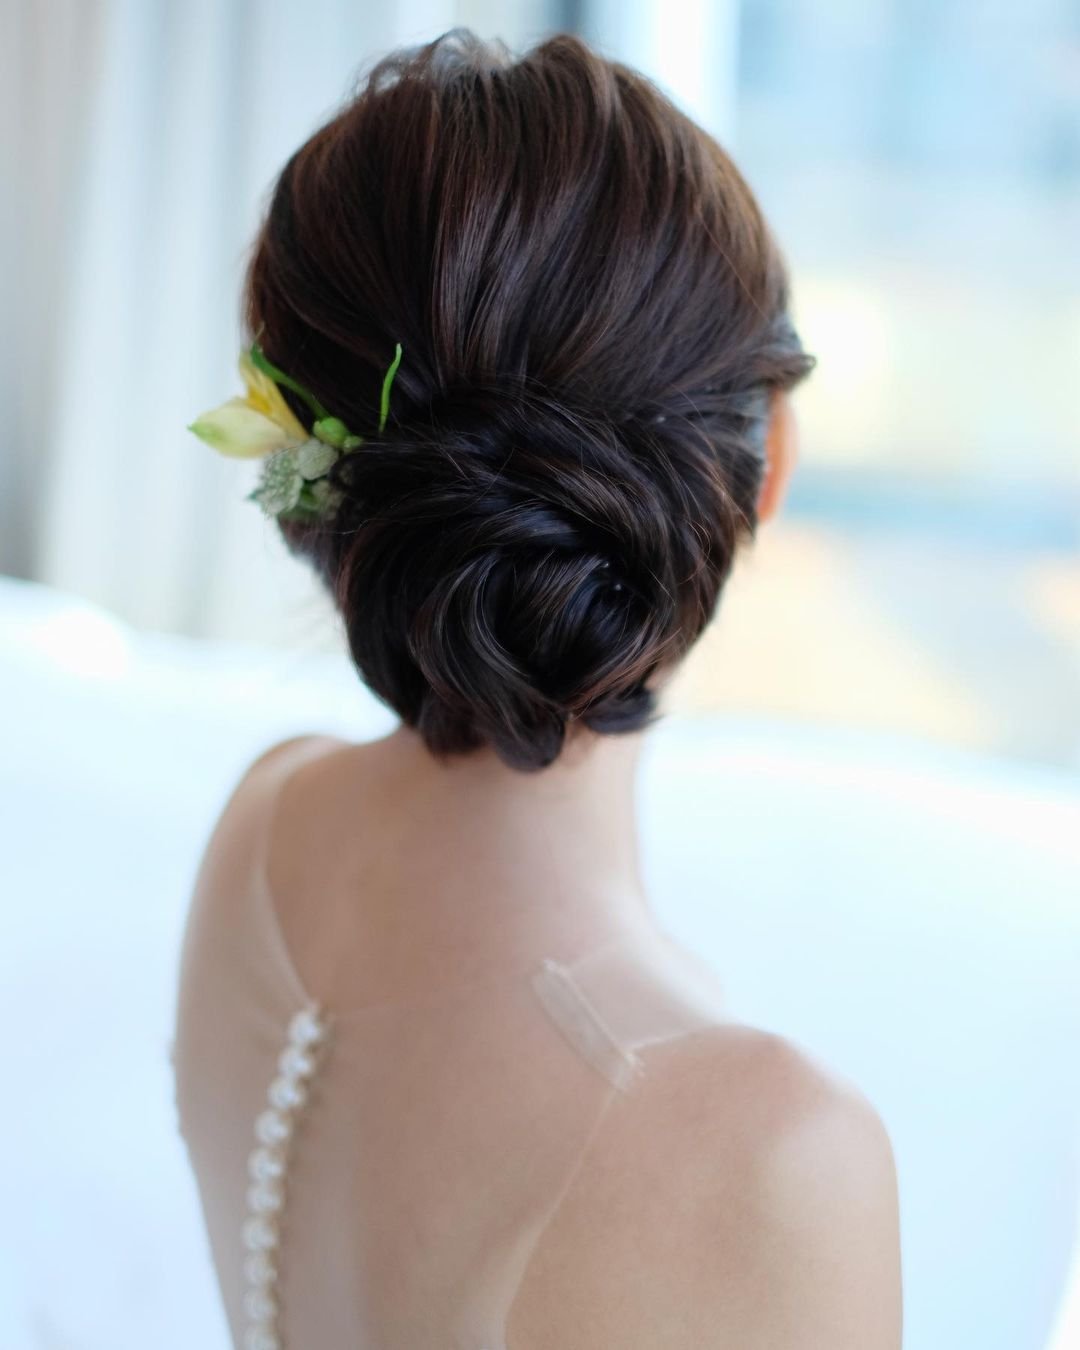 Short Hair To Ultra Chic, Short Bridal Hair Styles Are Now In The Fad